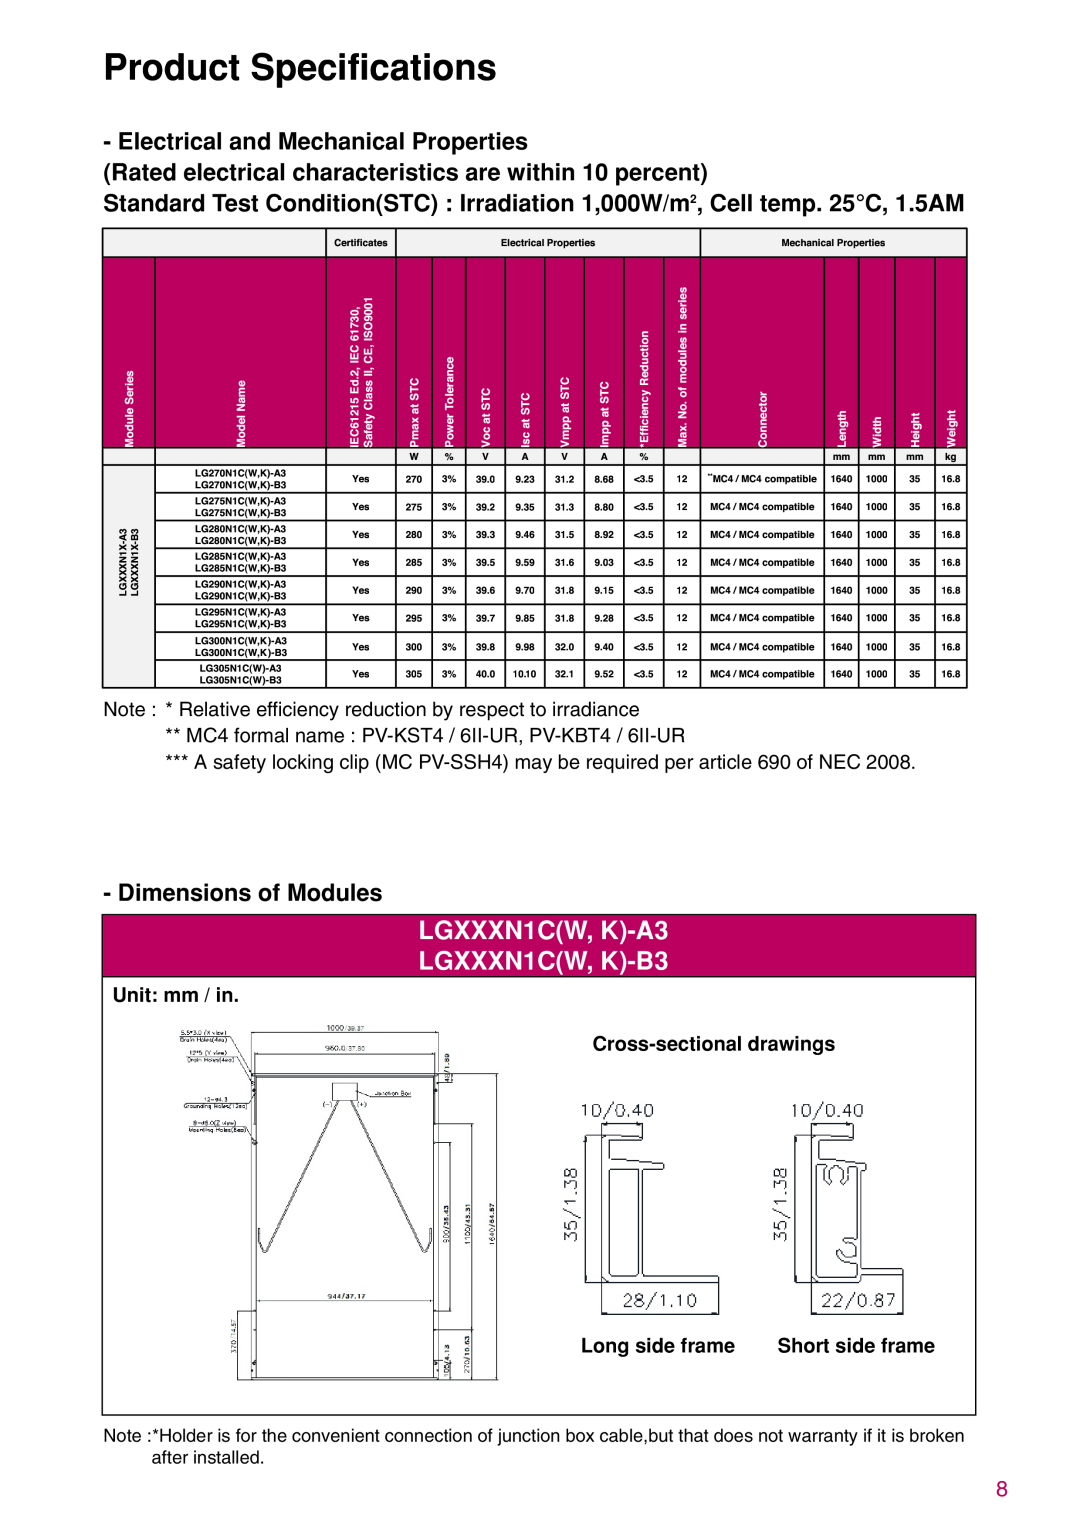 LG Electronics K)-B3 Product Specifications, Note * Relative efficiency reduction by respect to irradiance, +2!6-845 